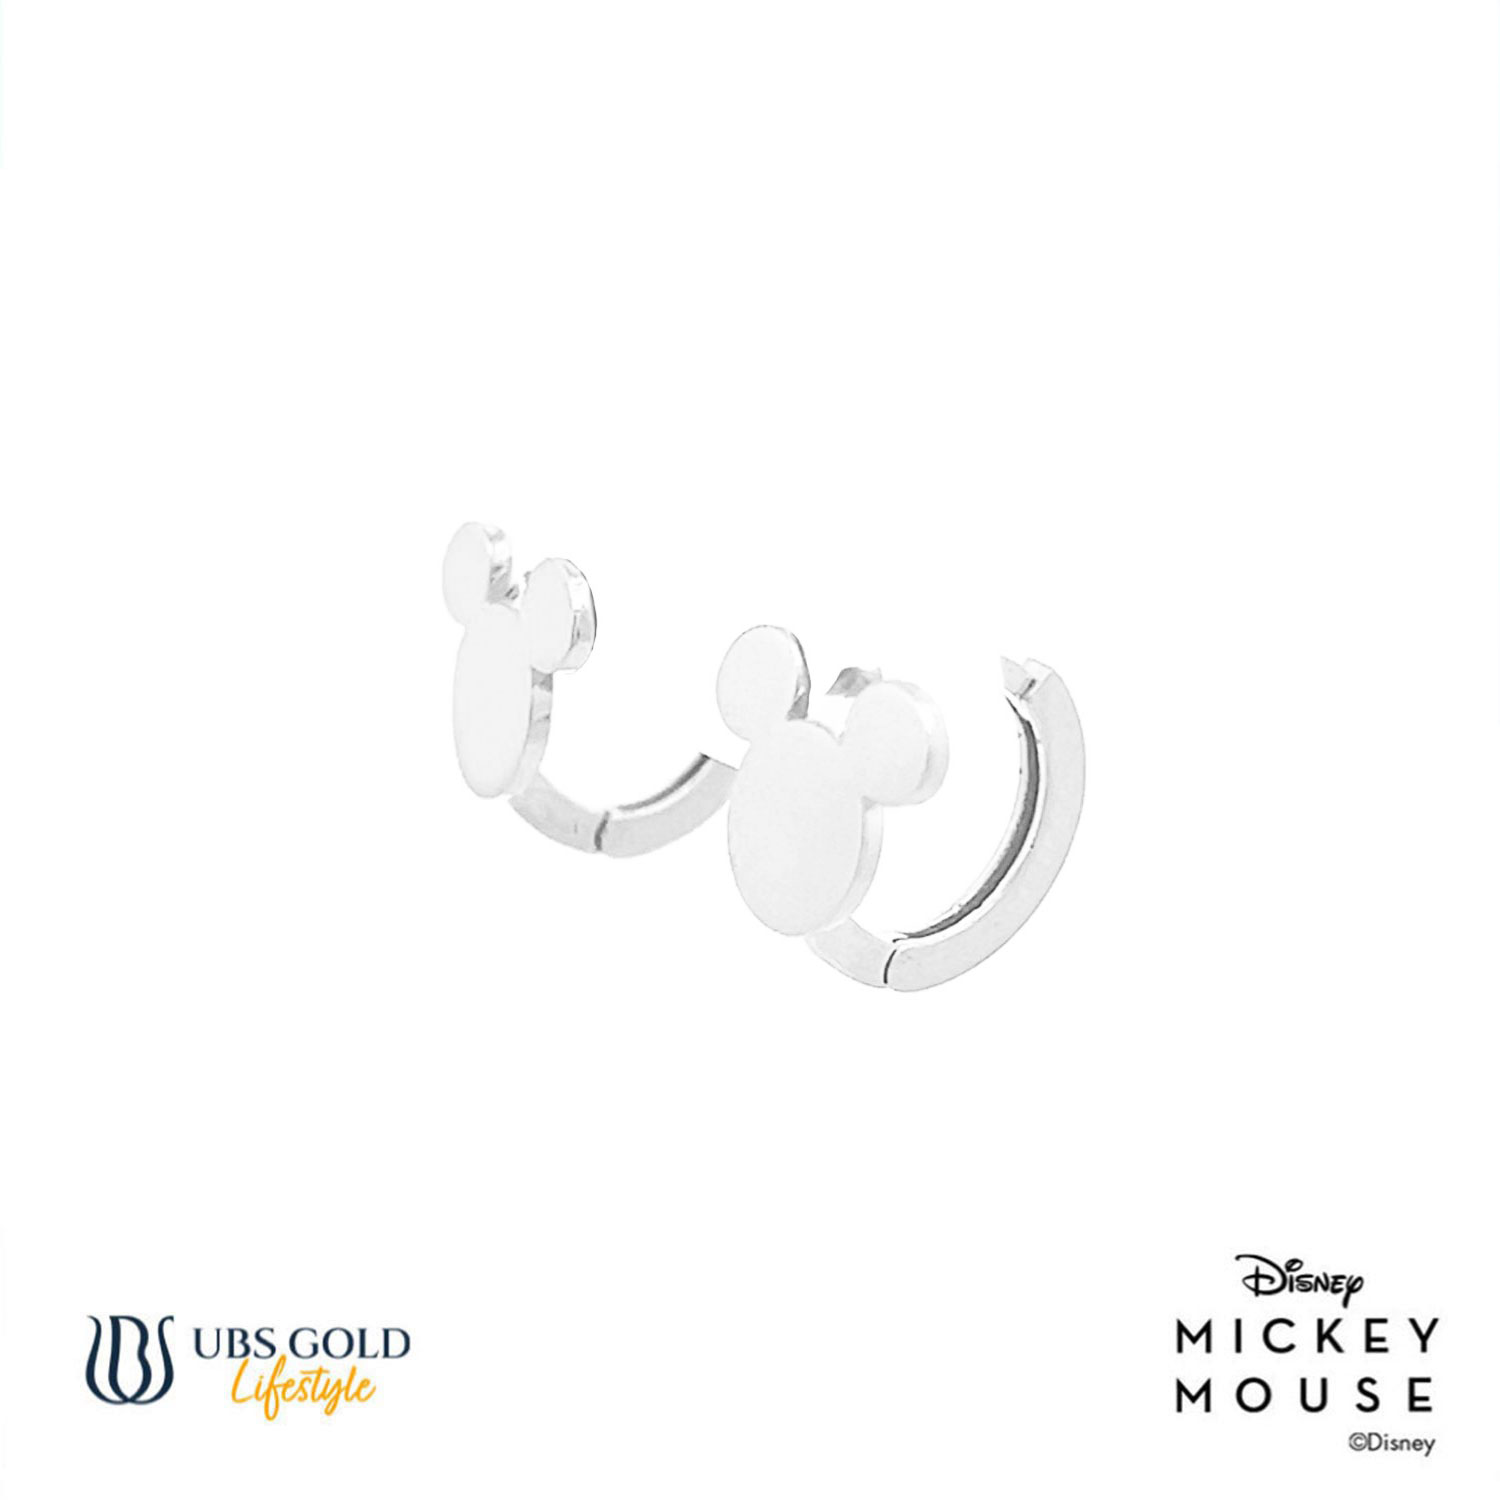 UBS Gold Anting Emas Disney Mickey Mouse - Cay0029 - 17K